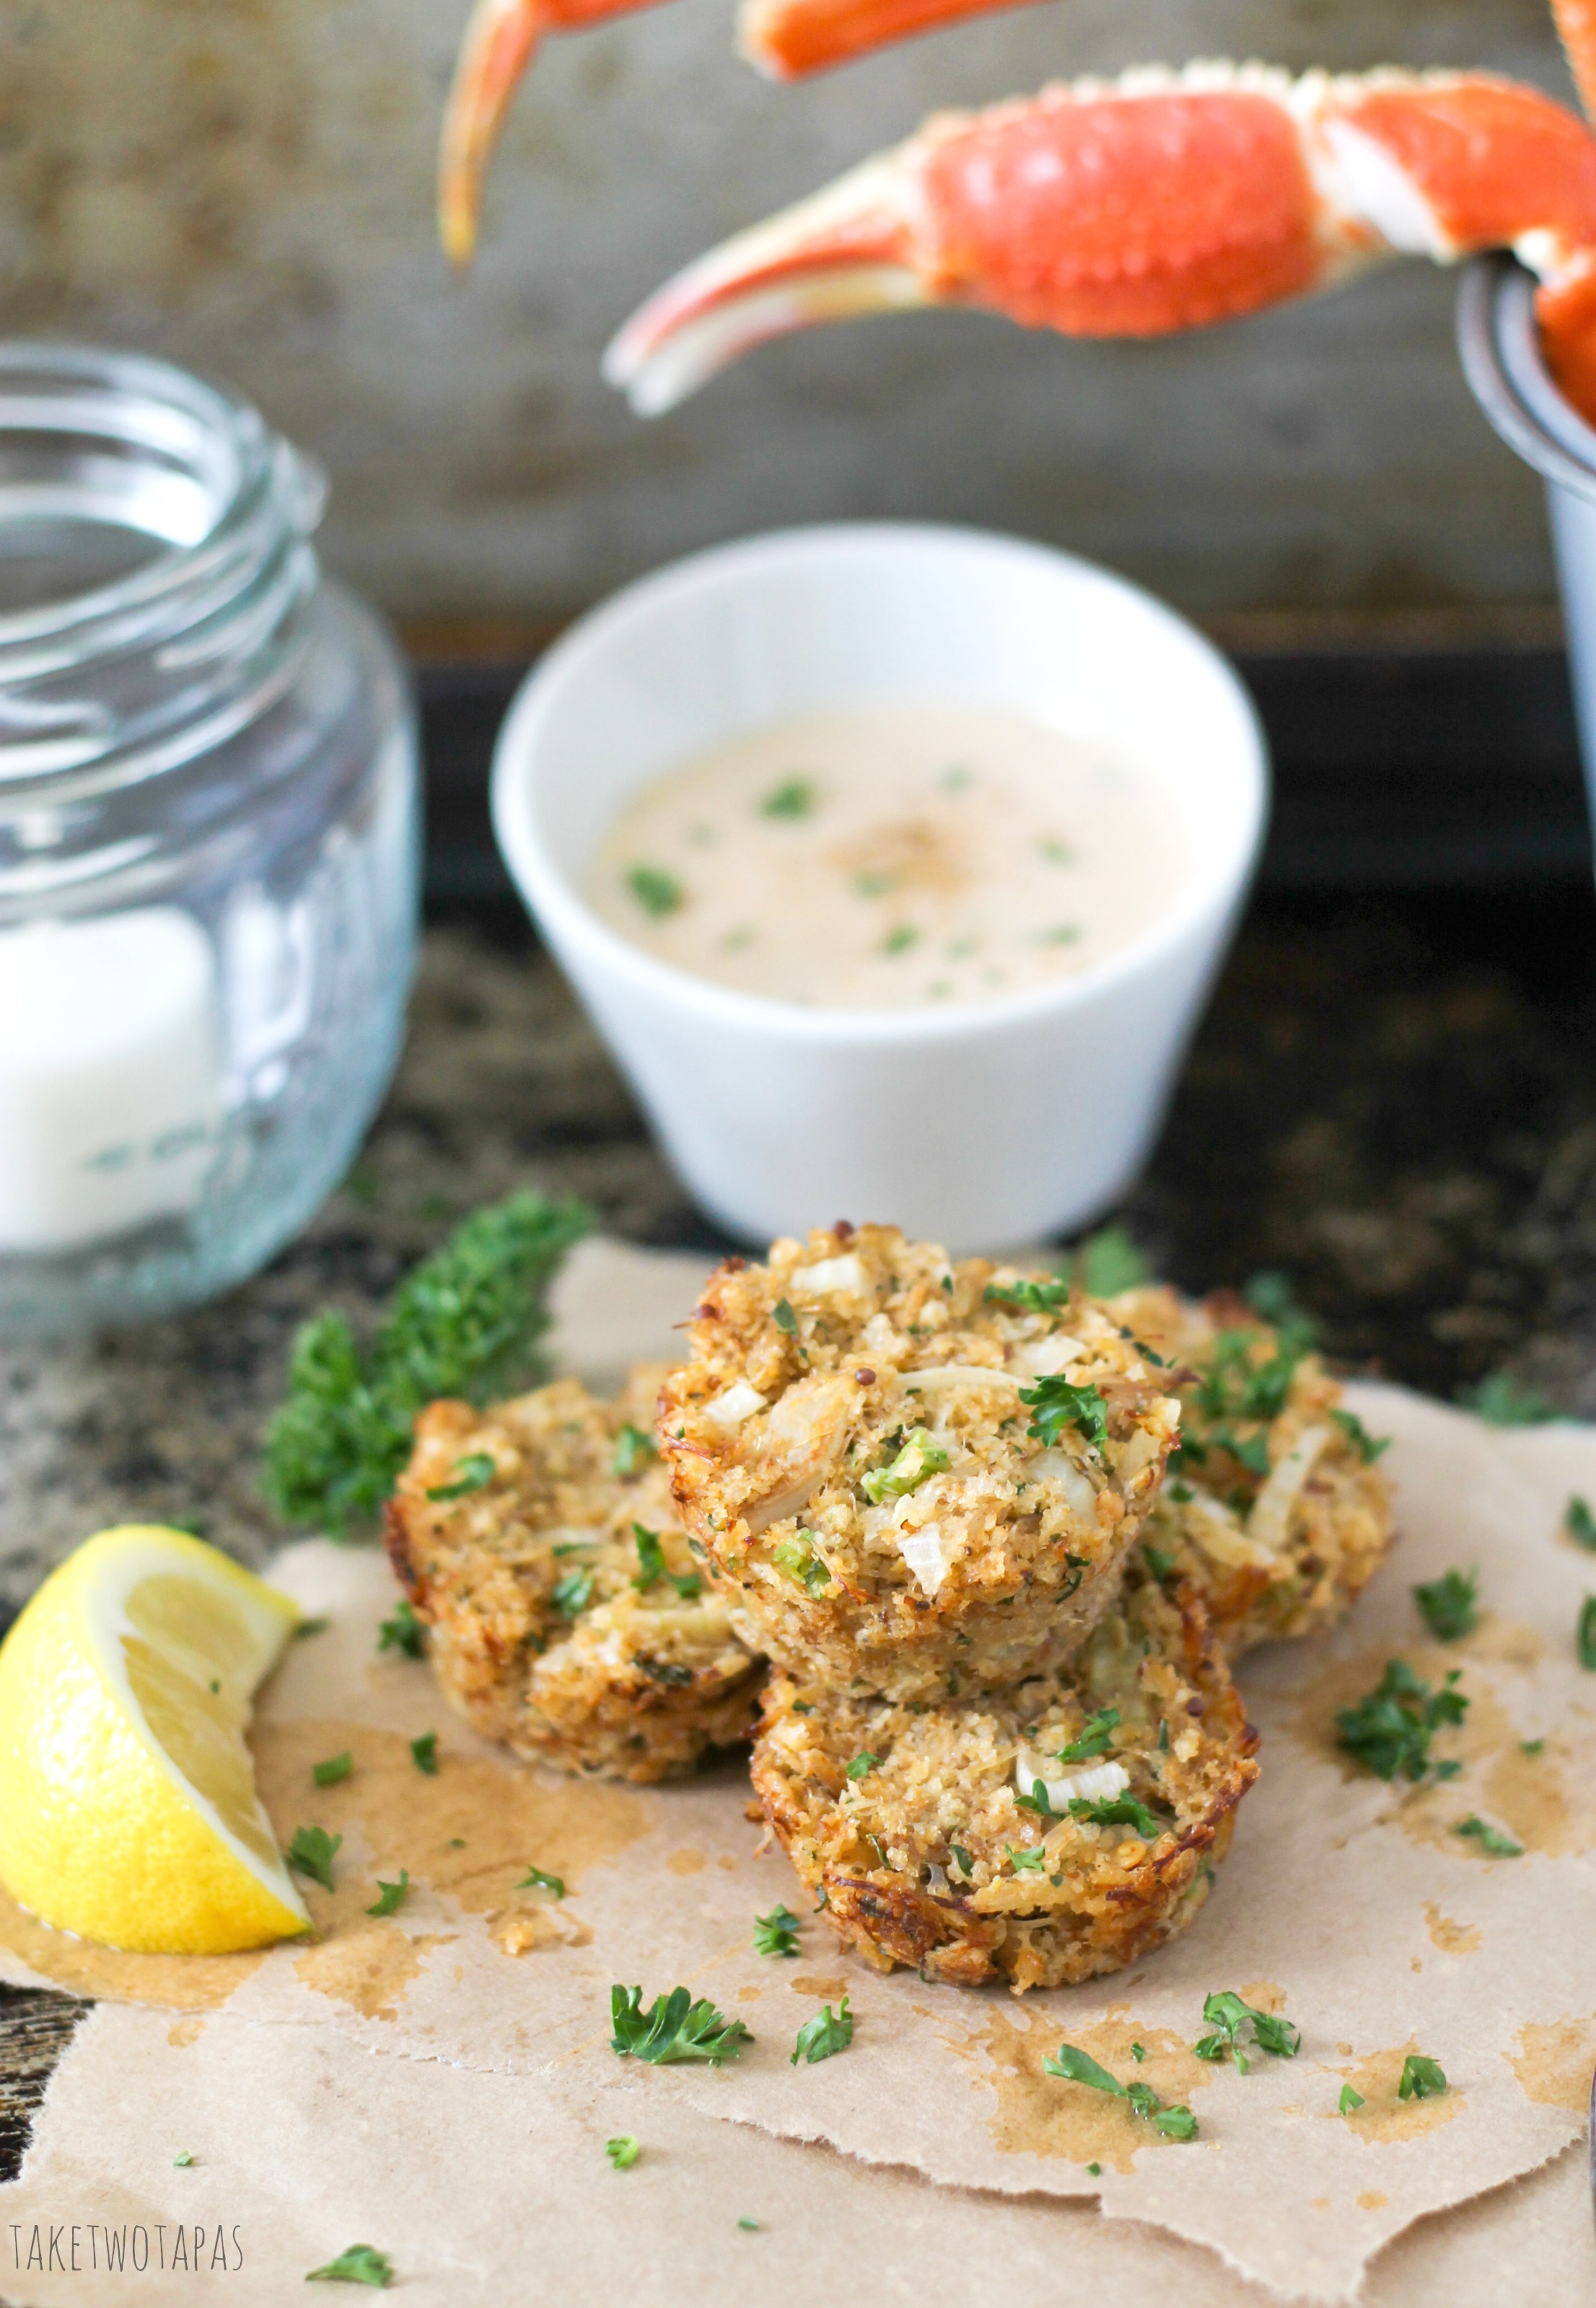 Crab cakes are a great appetizer or main dish for dinner! This Muffin Tin Crab Cakes recipe is full of lump crab meat and have the right amount of spice! Drizzle with Old Bay Remoulade for a treat that will take you to the sea! 